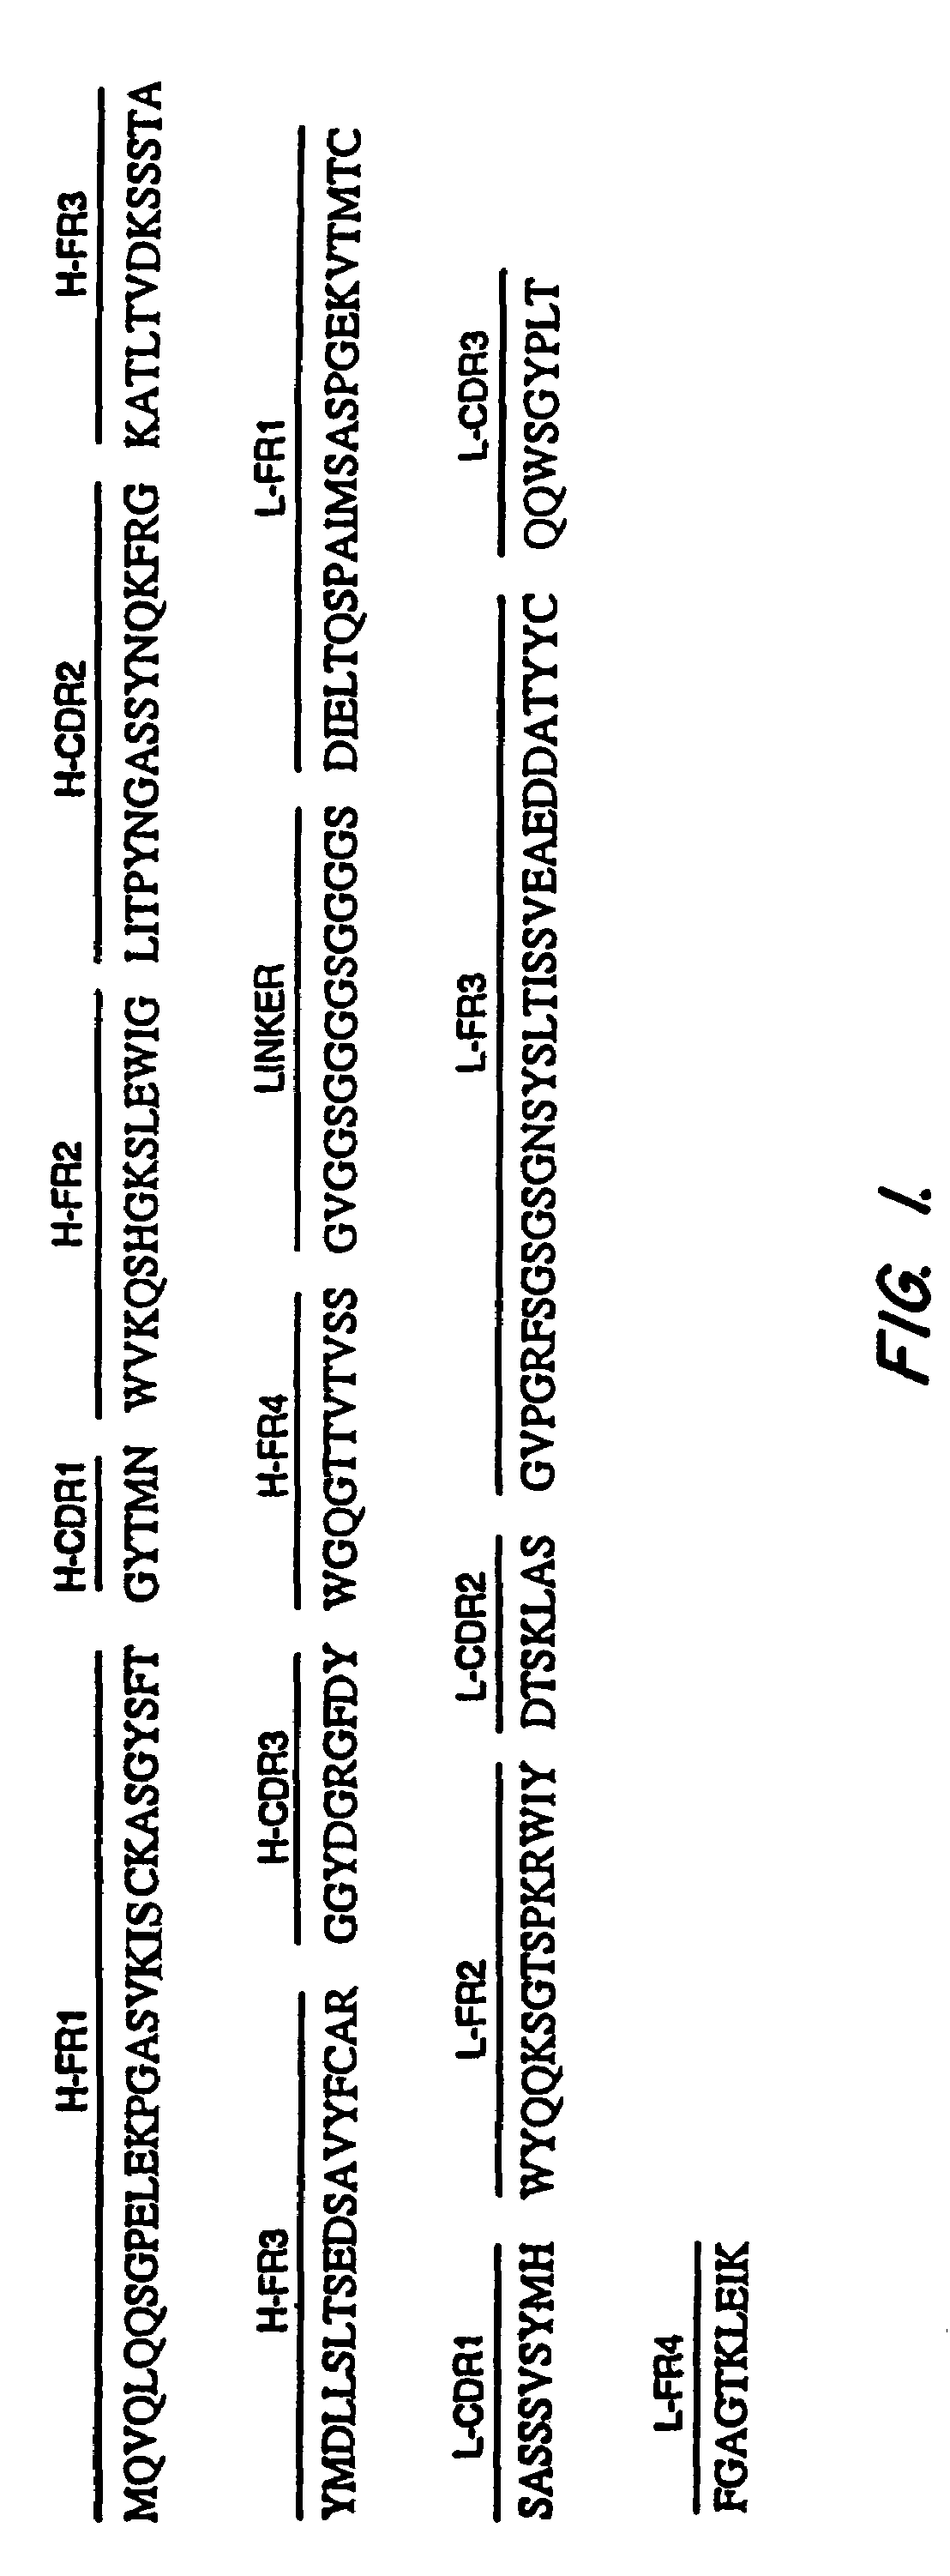 Antibodies, including Fv molecules, and immunoconjugates having high binding affinity for mesothelin and methods for their use